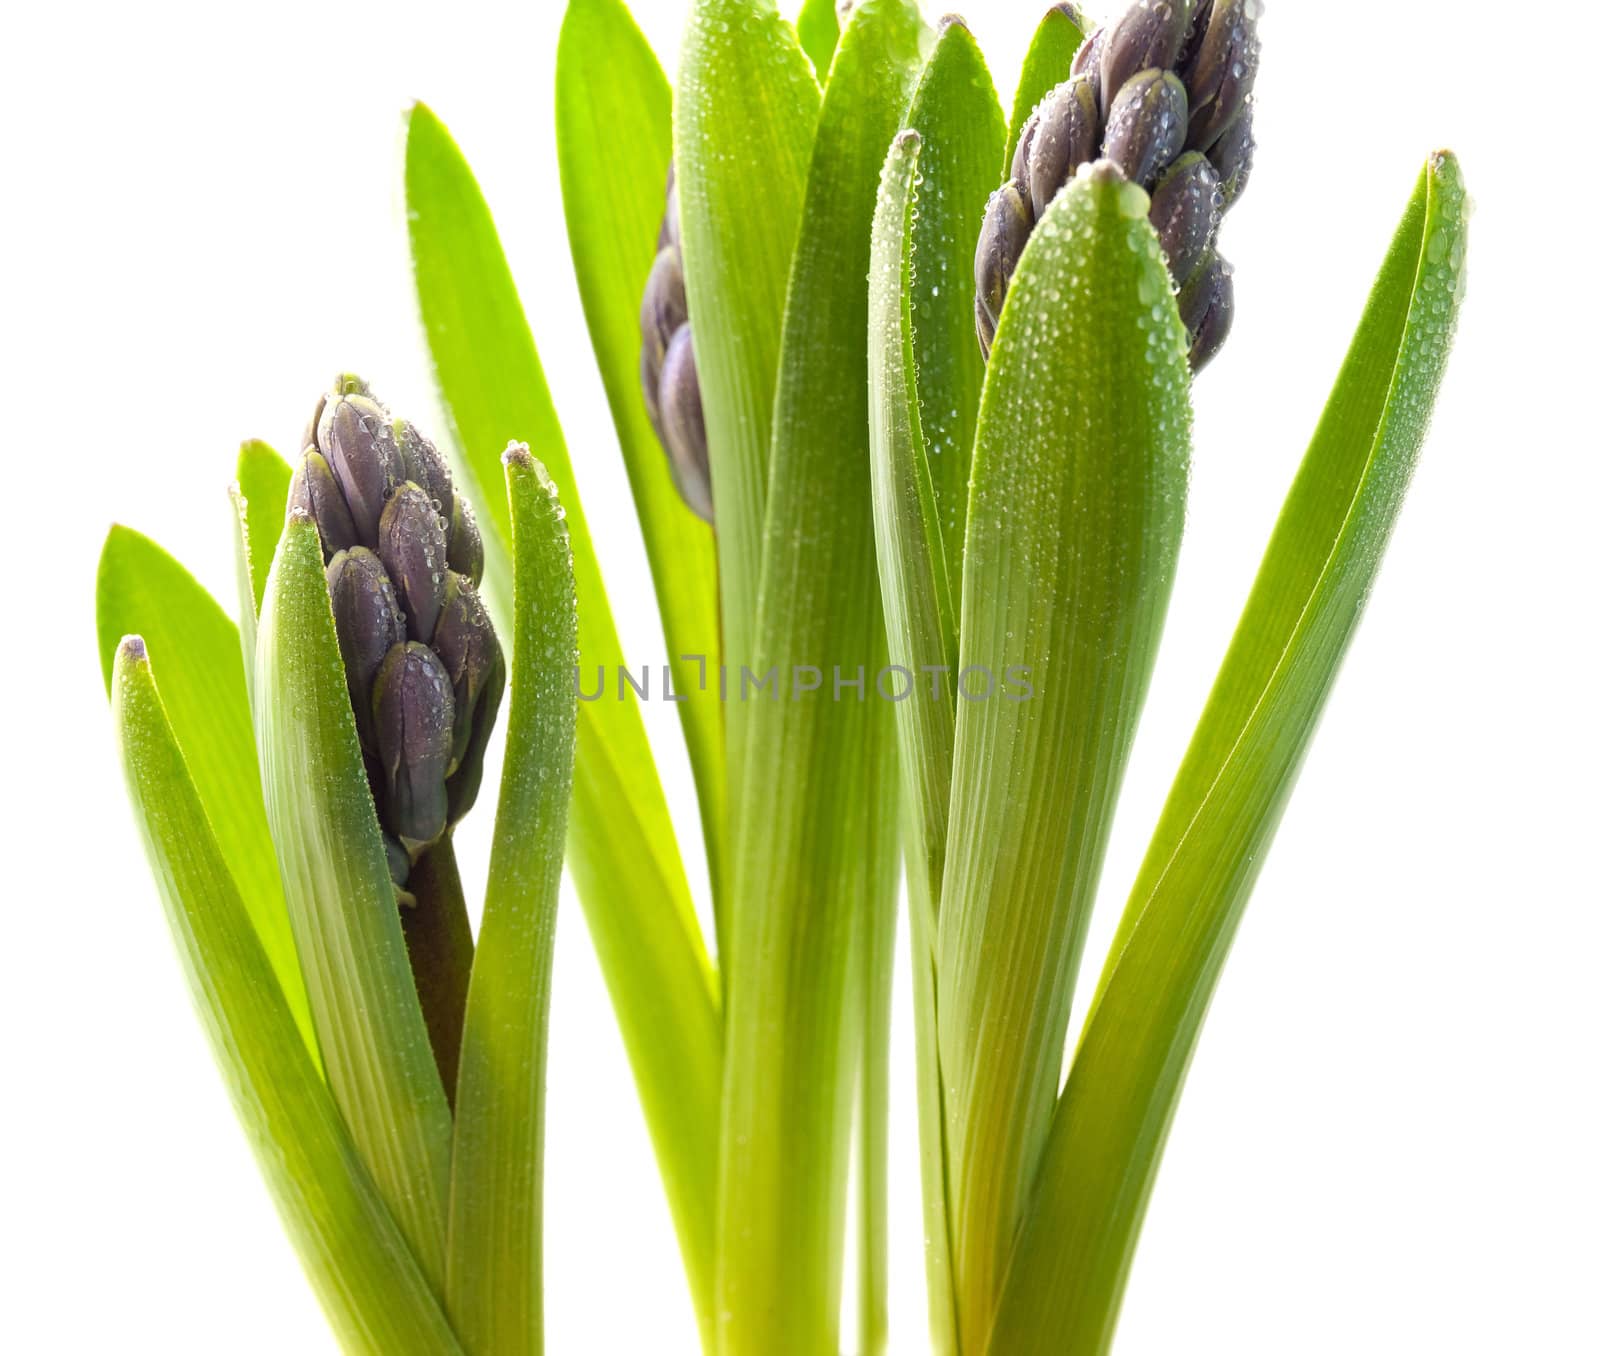 Purple hyacinth getting flowered on white background